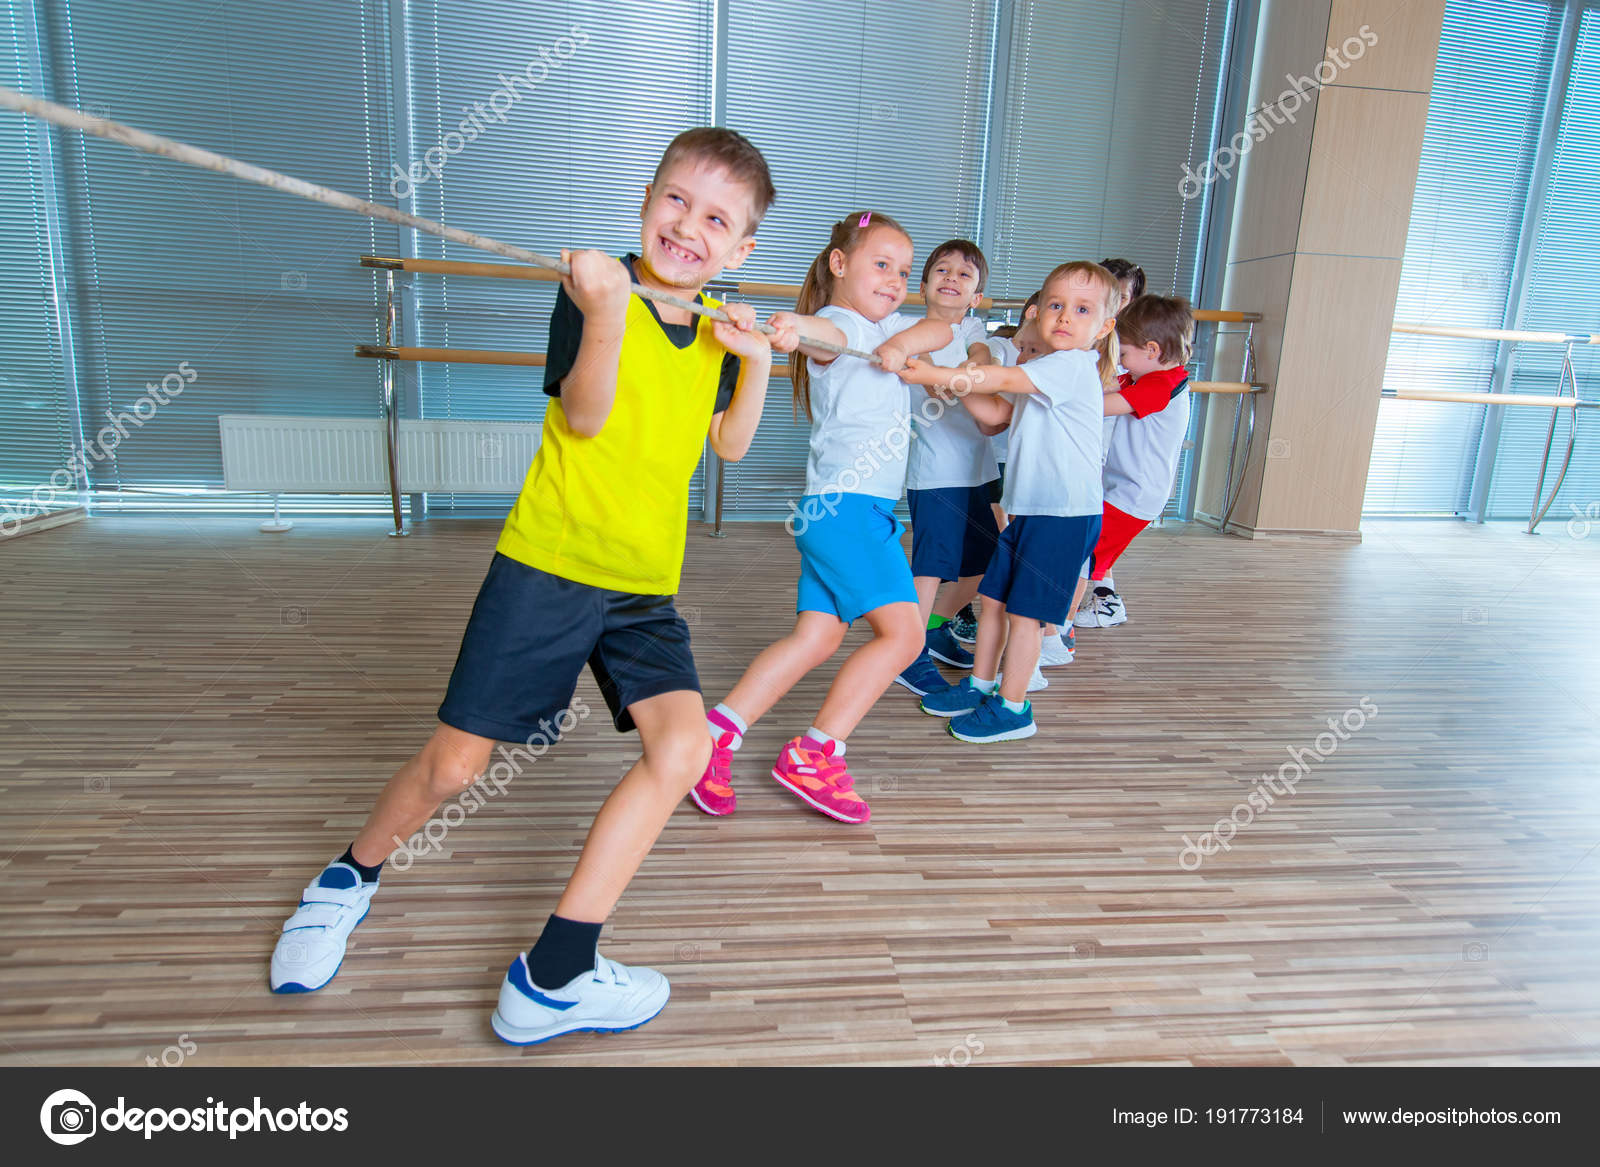 Children And Recreation Group Of Happy Multiethnic School Kids Playing Tug Of War With Rope In Gym Stock Photo Image By C Satyrenko 191773184 Poslednie tvity ot kids play gym (@kidsplaygymin). depositphotos